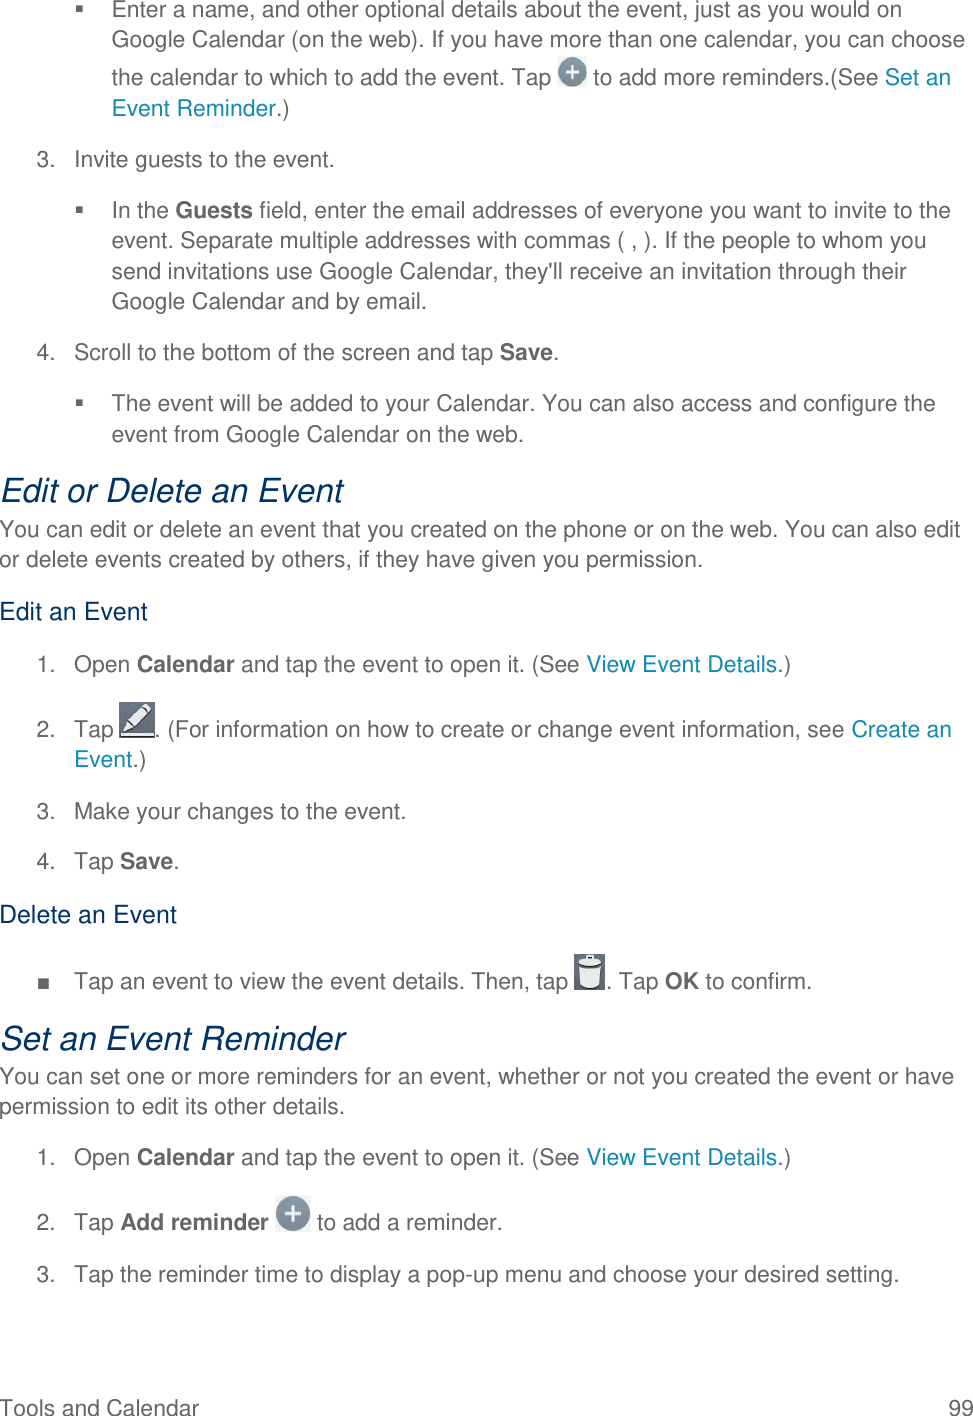 Tools and Calendar  99   Enter a name, and other optional details about the event, just as you would on Google Calendar (on the web). If you have more than one calendar, you can choose the calendar to which to add the event. Tap   to add more reminders.(See Set an Event Reminder.) 3.  Invite guests to the event.   In the Guests field, enter the email addresses of everyone you want to invite to the event. Separate multiple addresses with commas ( , ). If the people to whom you send invitations use Google Calendar, they&apos;ll receive an invitation through their Google Calendar and by email. 4.  Scroll to the bottom of the screen and tap Save.   The event will be added to your Calendar. You can also access and configure the event from Google Calendar on the web. Edit or Delete an Event You can edit or delete an event that you created on the phone or on the web. You can also edit or delete events created by others, if they have given you permission. Edit an Event 1.  Open Calendar and tap the event to open it. (See View Event Details.) 2.  Tap  . (For information on how to create or change event information, see Create an Event.) 3.  Make your changes to the event. 4.  Tap Save. Delete an Event ■  Tap an event to view the event details. Then, tap  . Tap OK to confirm. Set an Event Reminder You can set one or more reminders for an event, whether or not you created the event or have permission to edit its other details. 1.  Open Calendar and tap the event to open it. (See View Event Details.) 2.  Tap Add reminder   to add a reminder. 3.  Tap the reminder time to display a pop-up menu and choose your desired setting. 